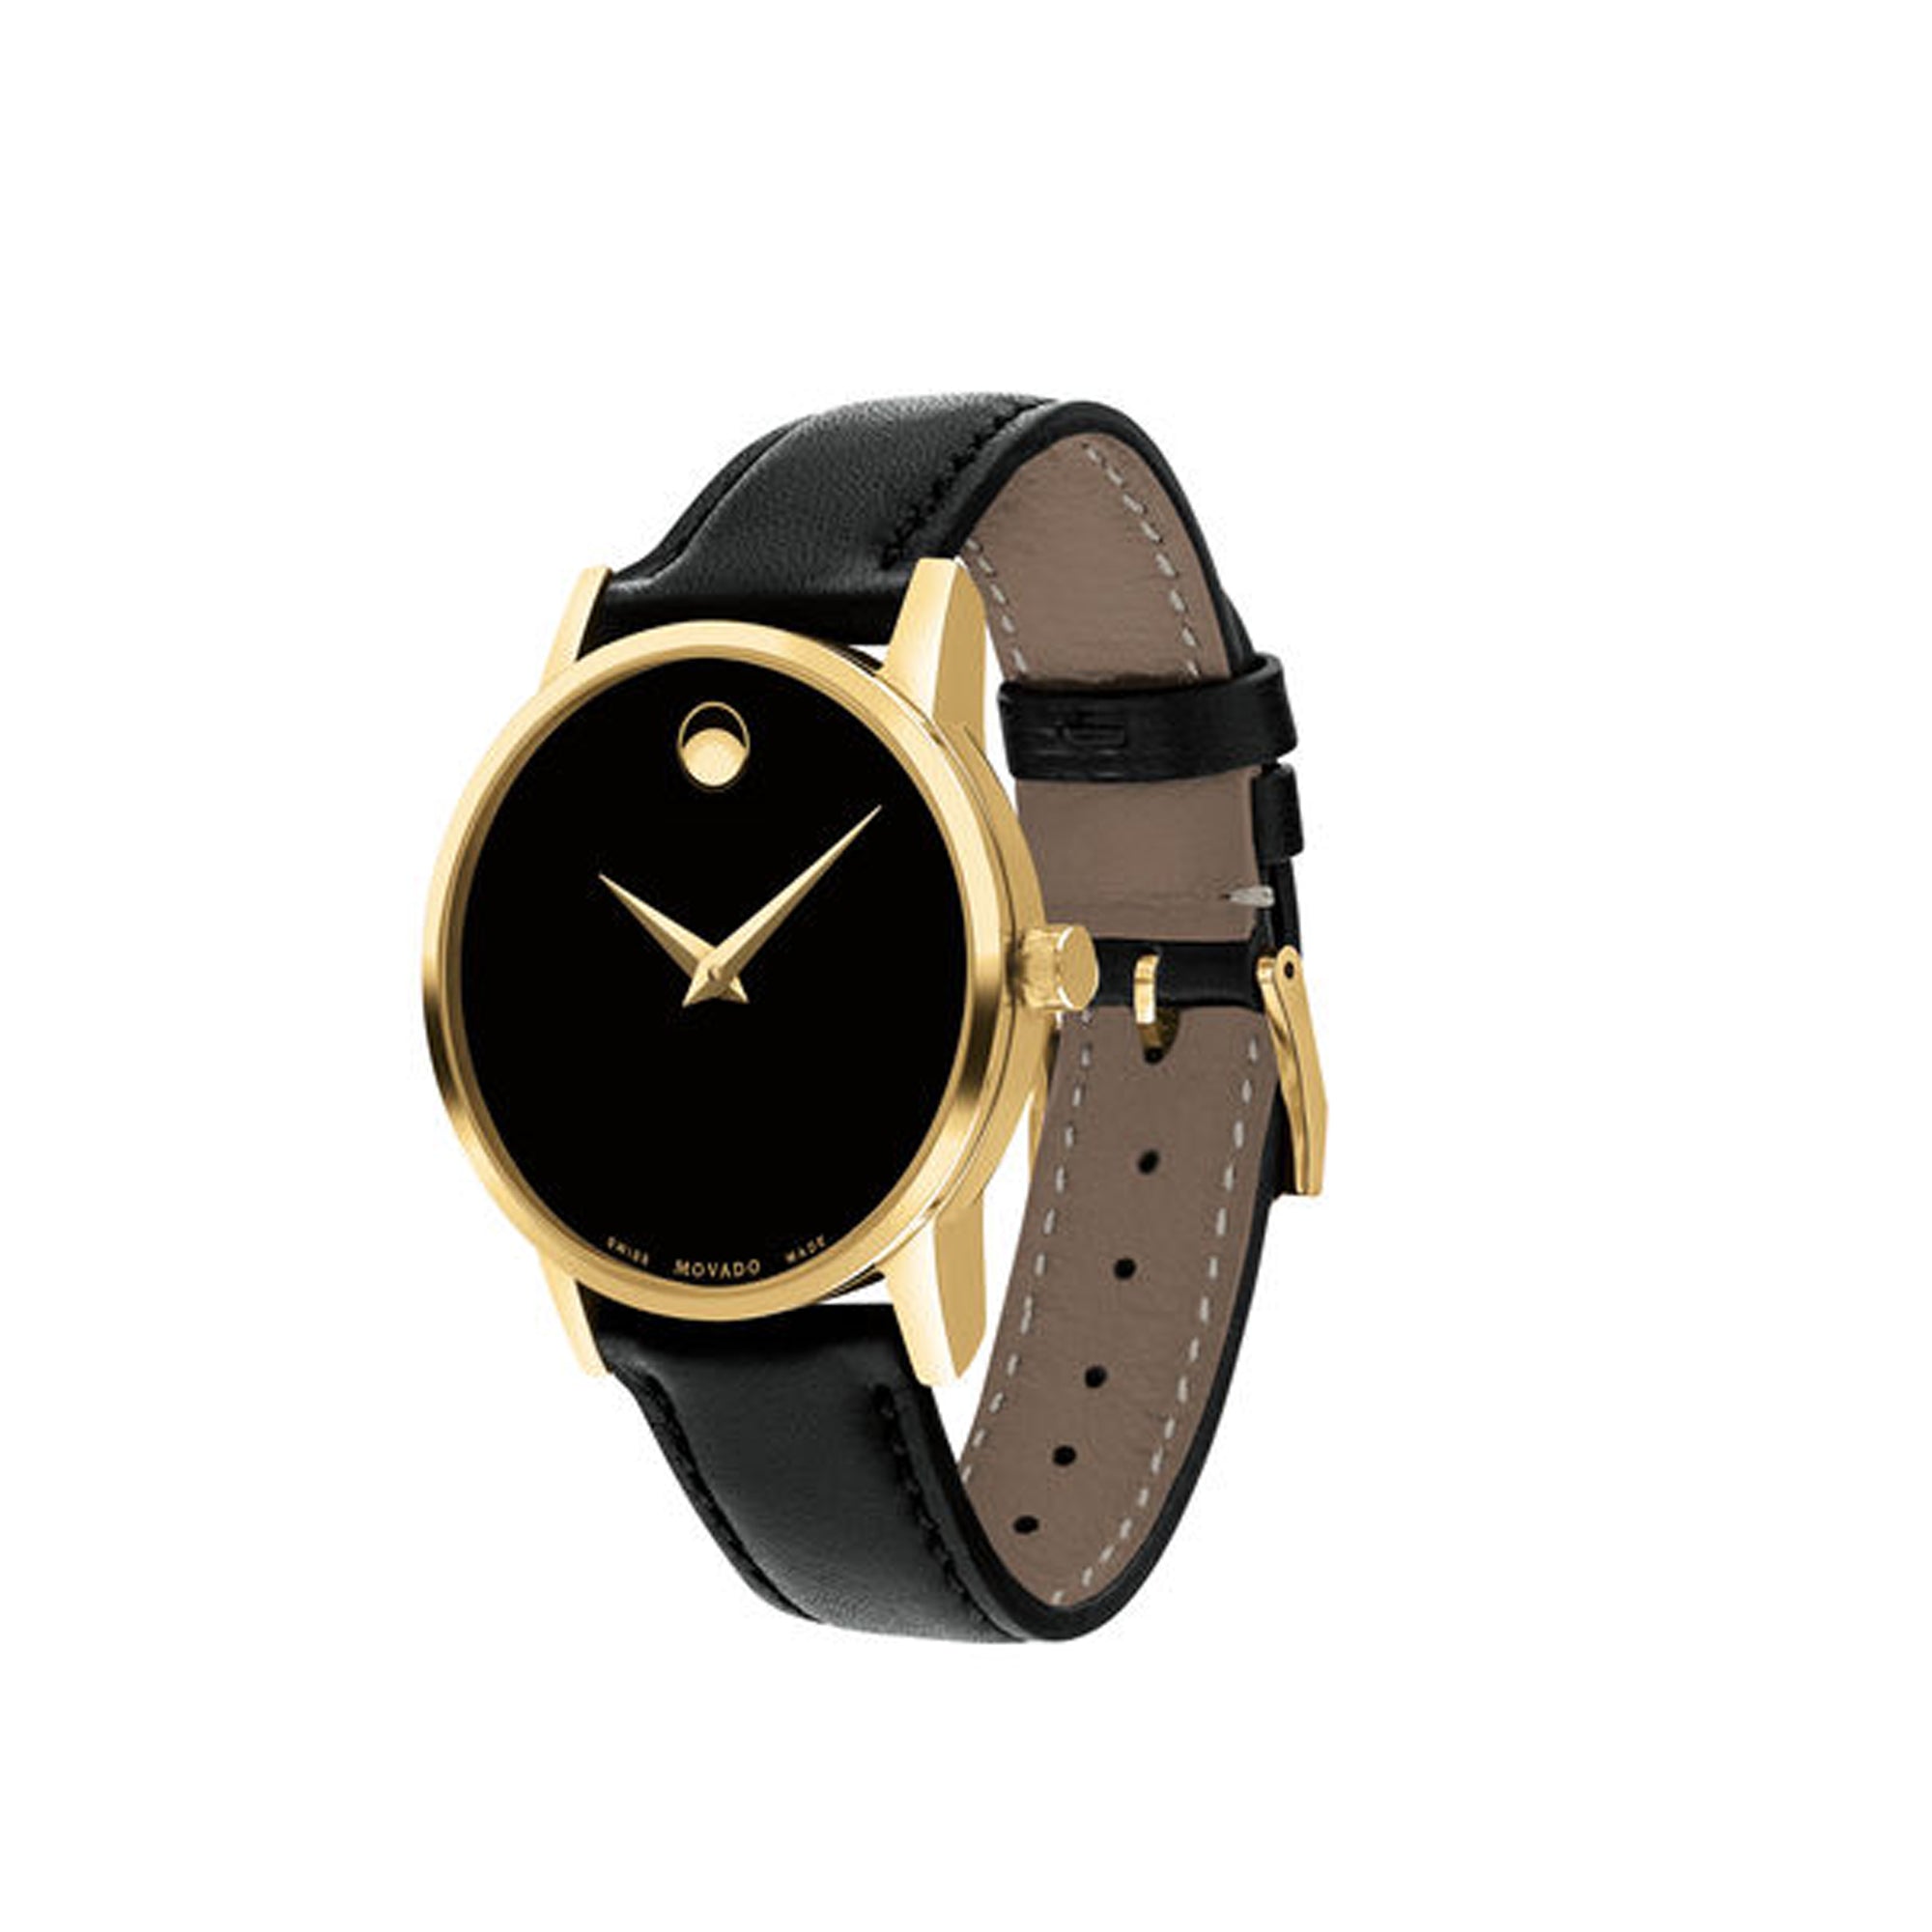 Movado Museum Classic Womens Watch with Black Dial and Black Leather Strap (Swiss quartz movement)